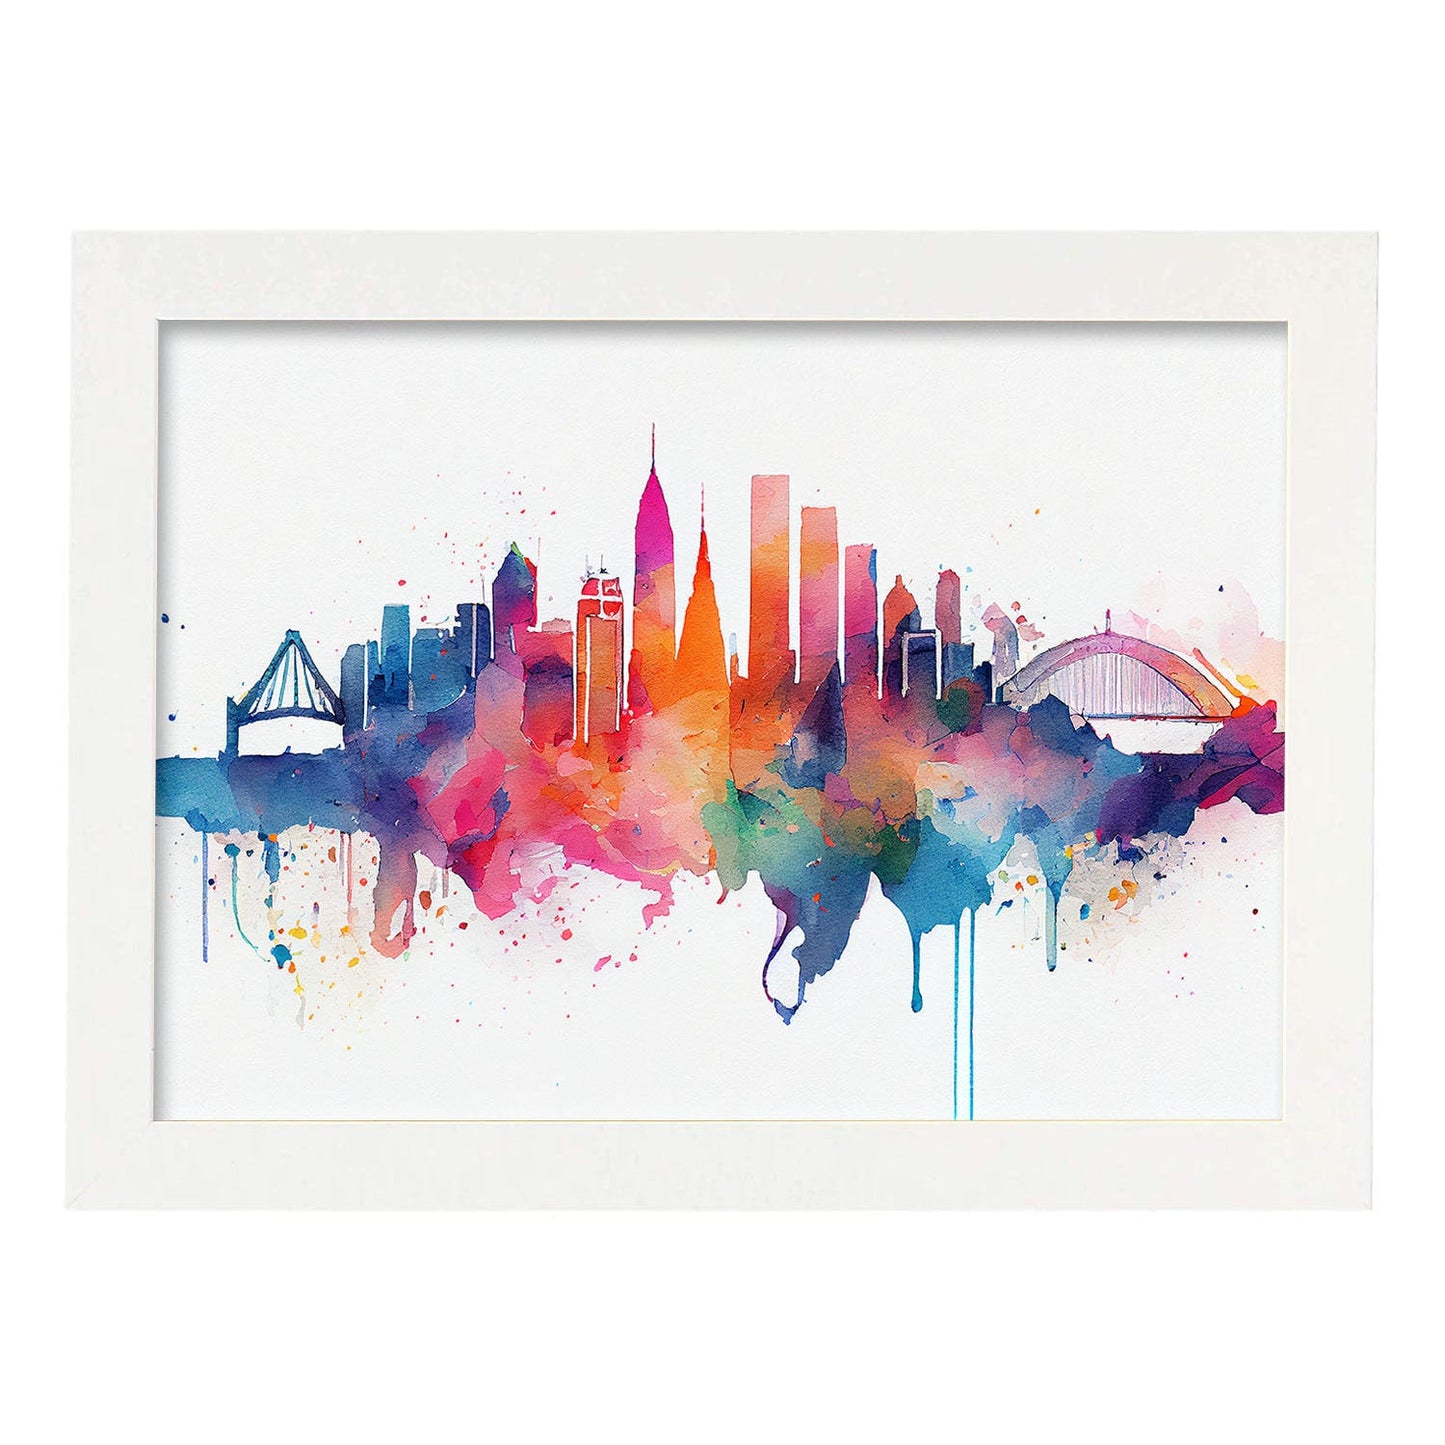 Nacnic watercolor of a skyline of the city of Sydney_1. Aesthetic Wall Art Prints for Bedroom or Living Room Design.-Artwork-Nacnic-A4-Marco Blanco-Nacnic Estudio SL